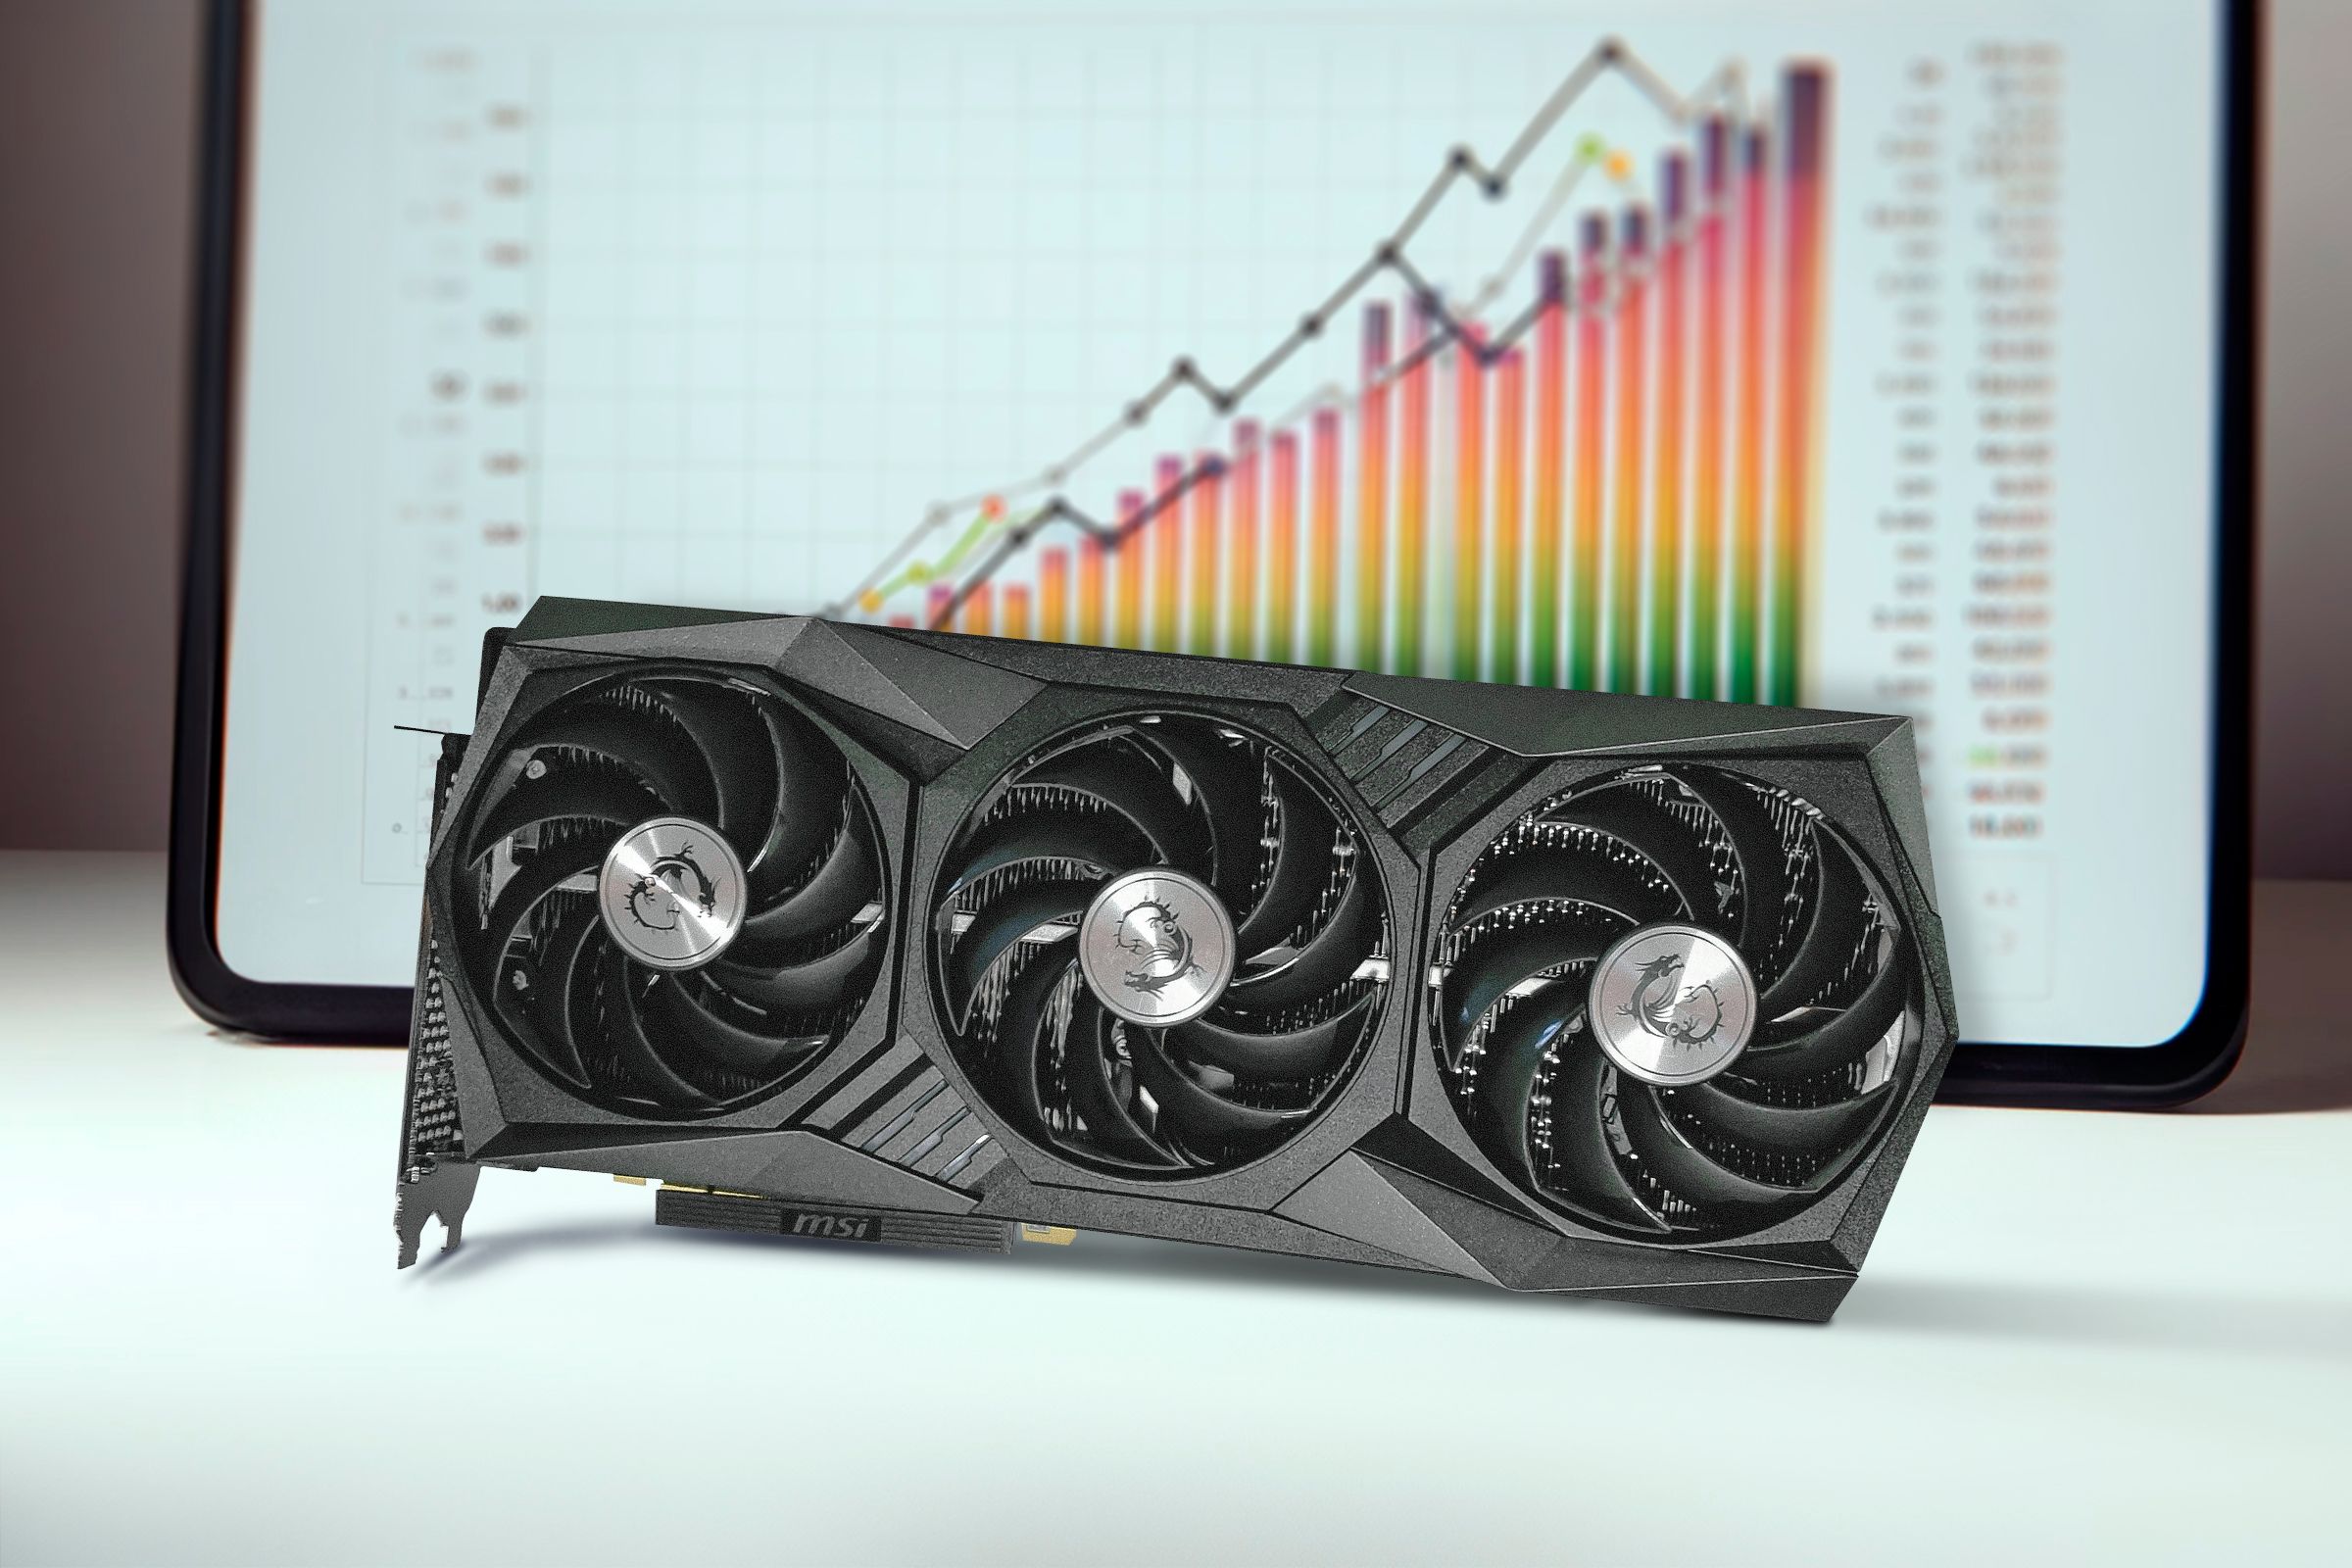 A GPU and a benchmark chart in the background.